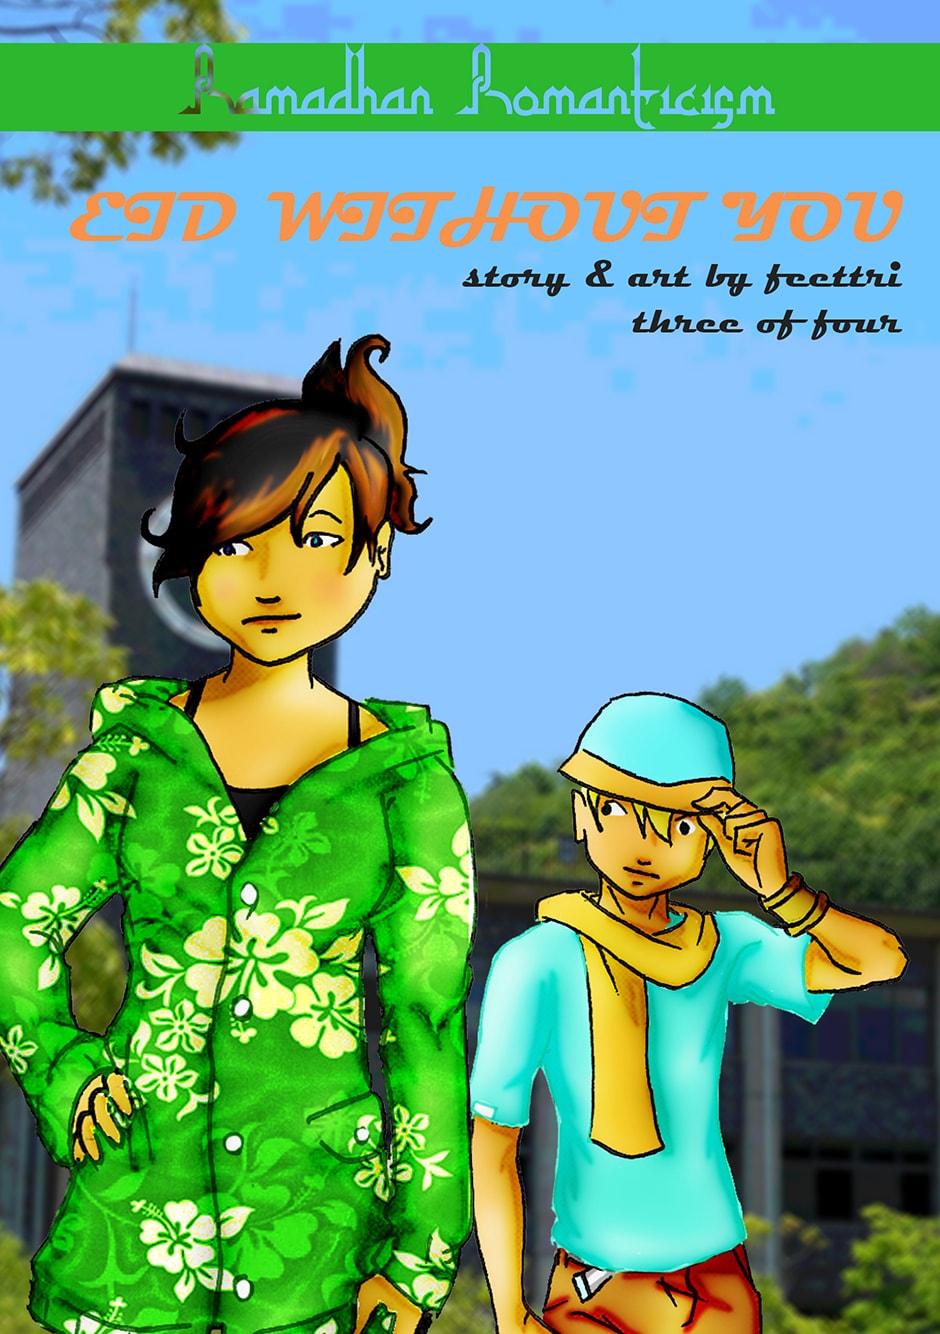 Comikrew Love Story :: Eid Ramadhan Event :- Eid Without You part 3 - image 1